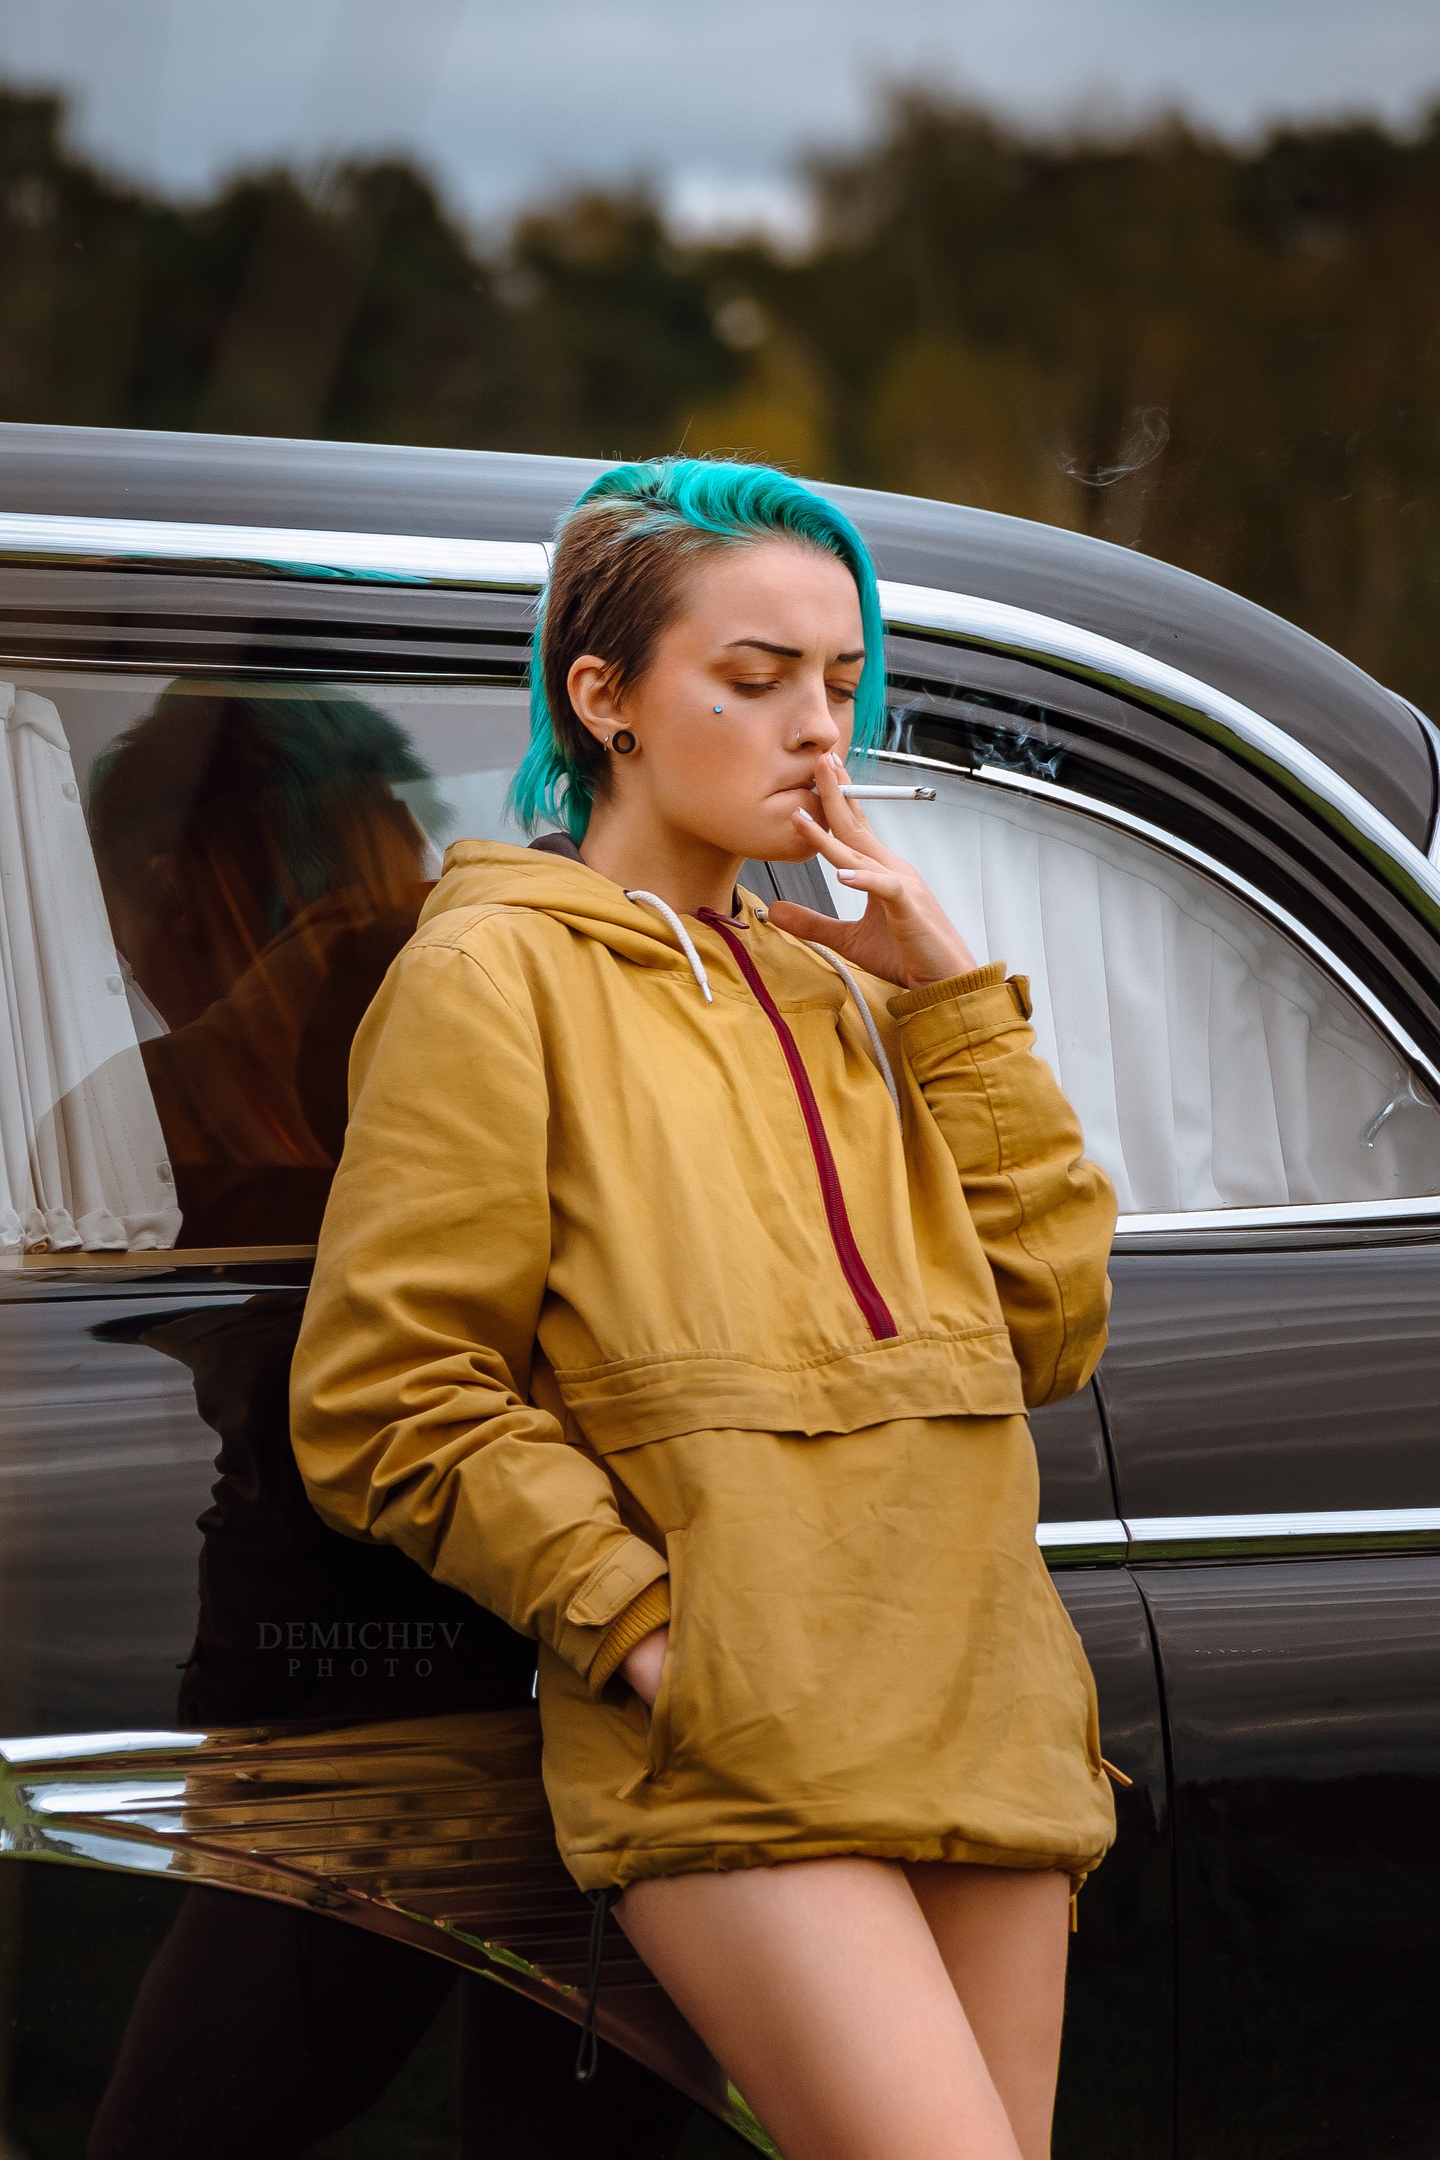 People 1440x2160 Petr Demichev women model car vehicle black cars women outdoors women with cars dyed hair cigarettes smoking piercing